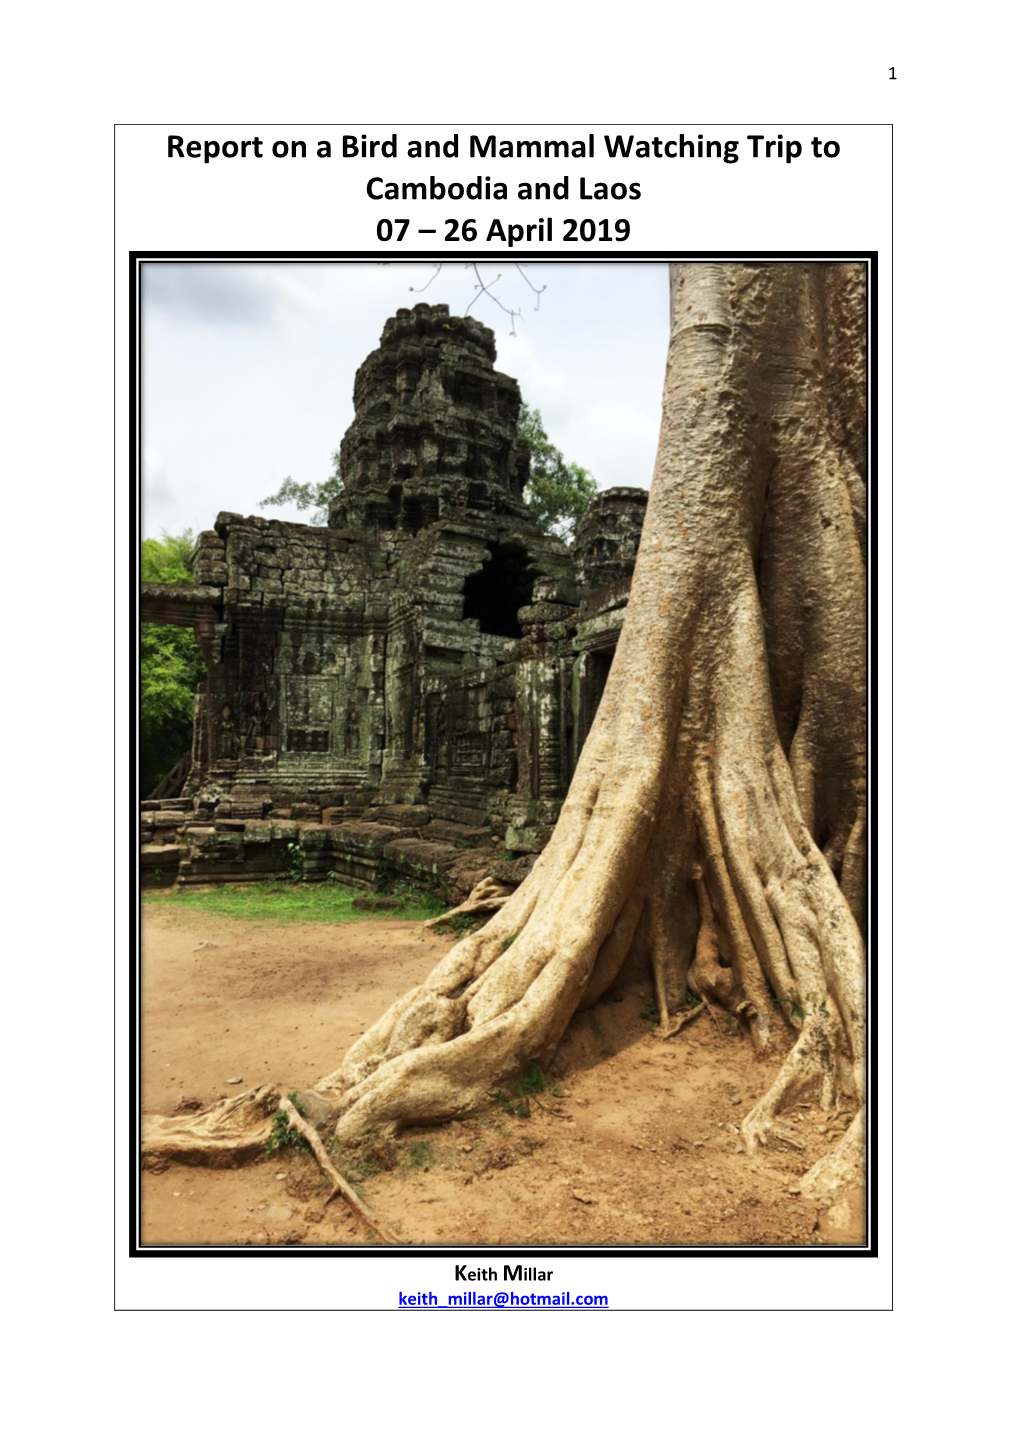 Report on a Bird and Mammal Watching Trip to Cambodia and Laos 07 – 26 April 2019